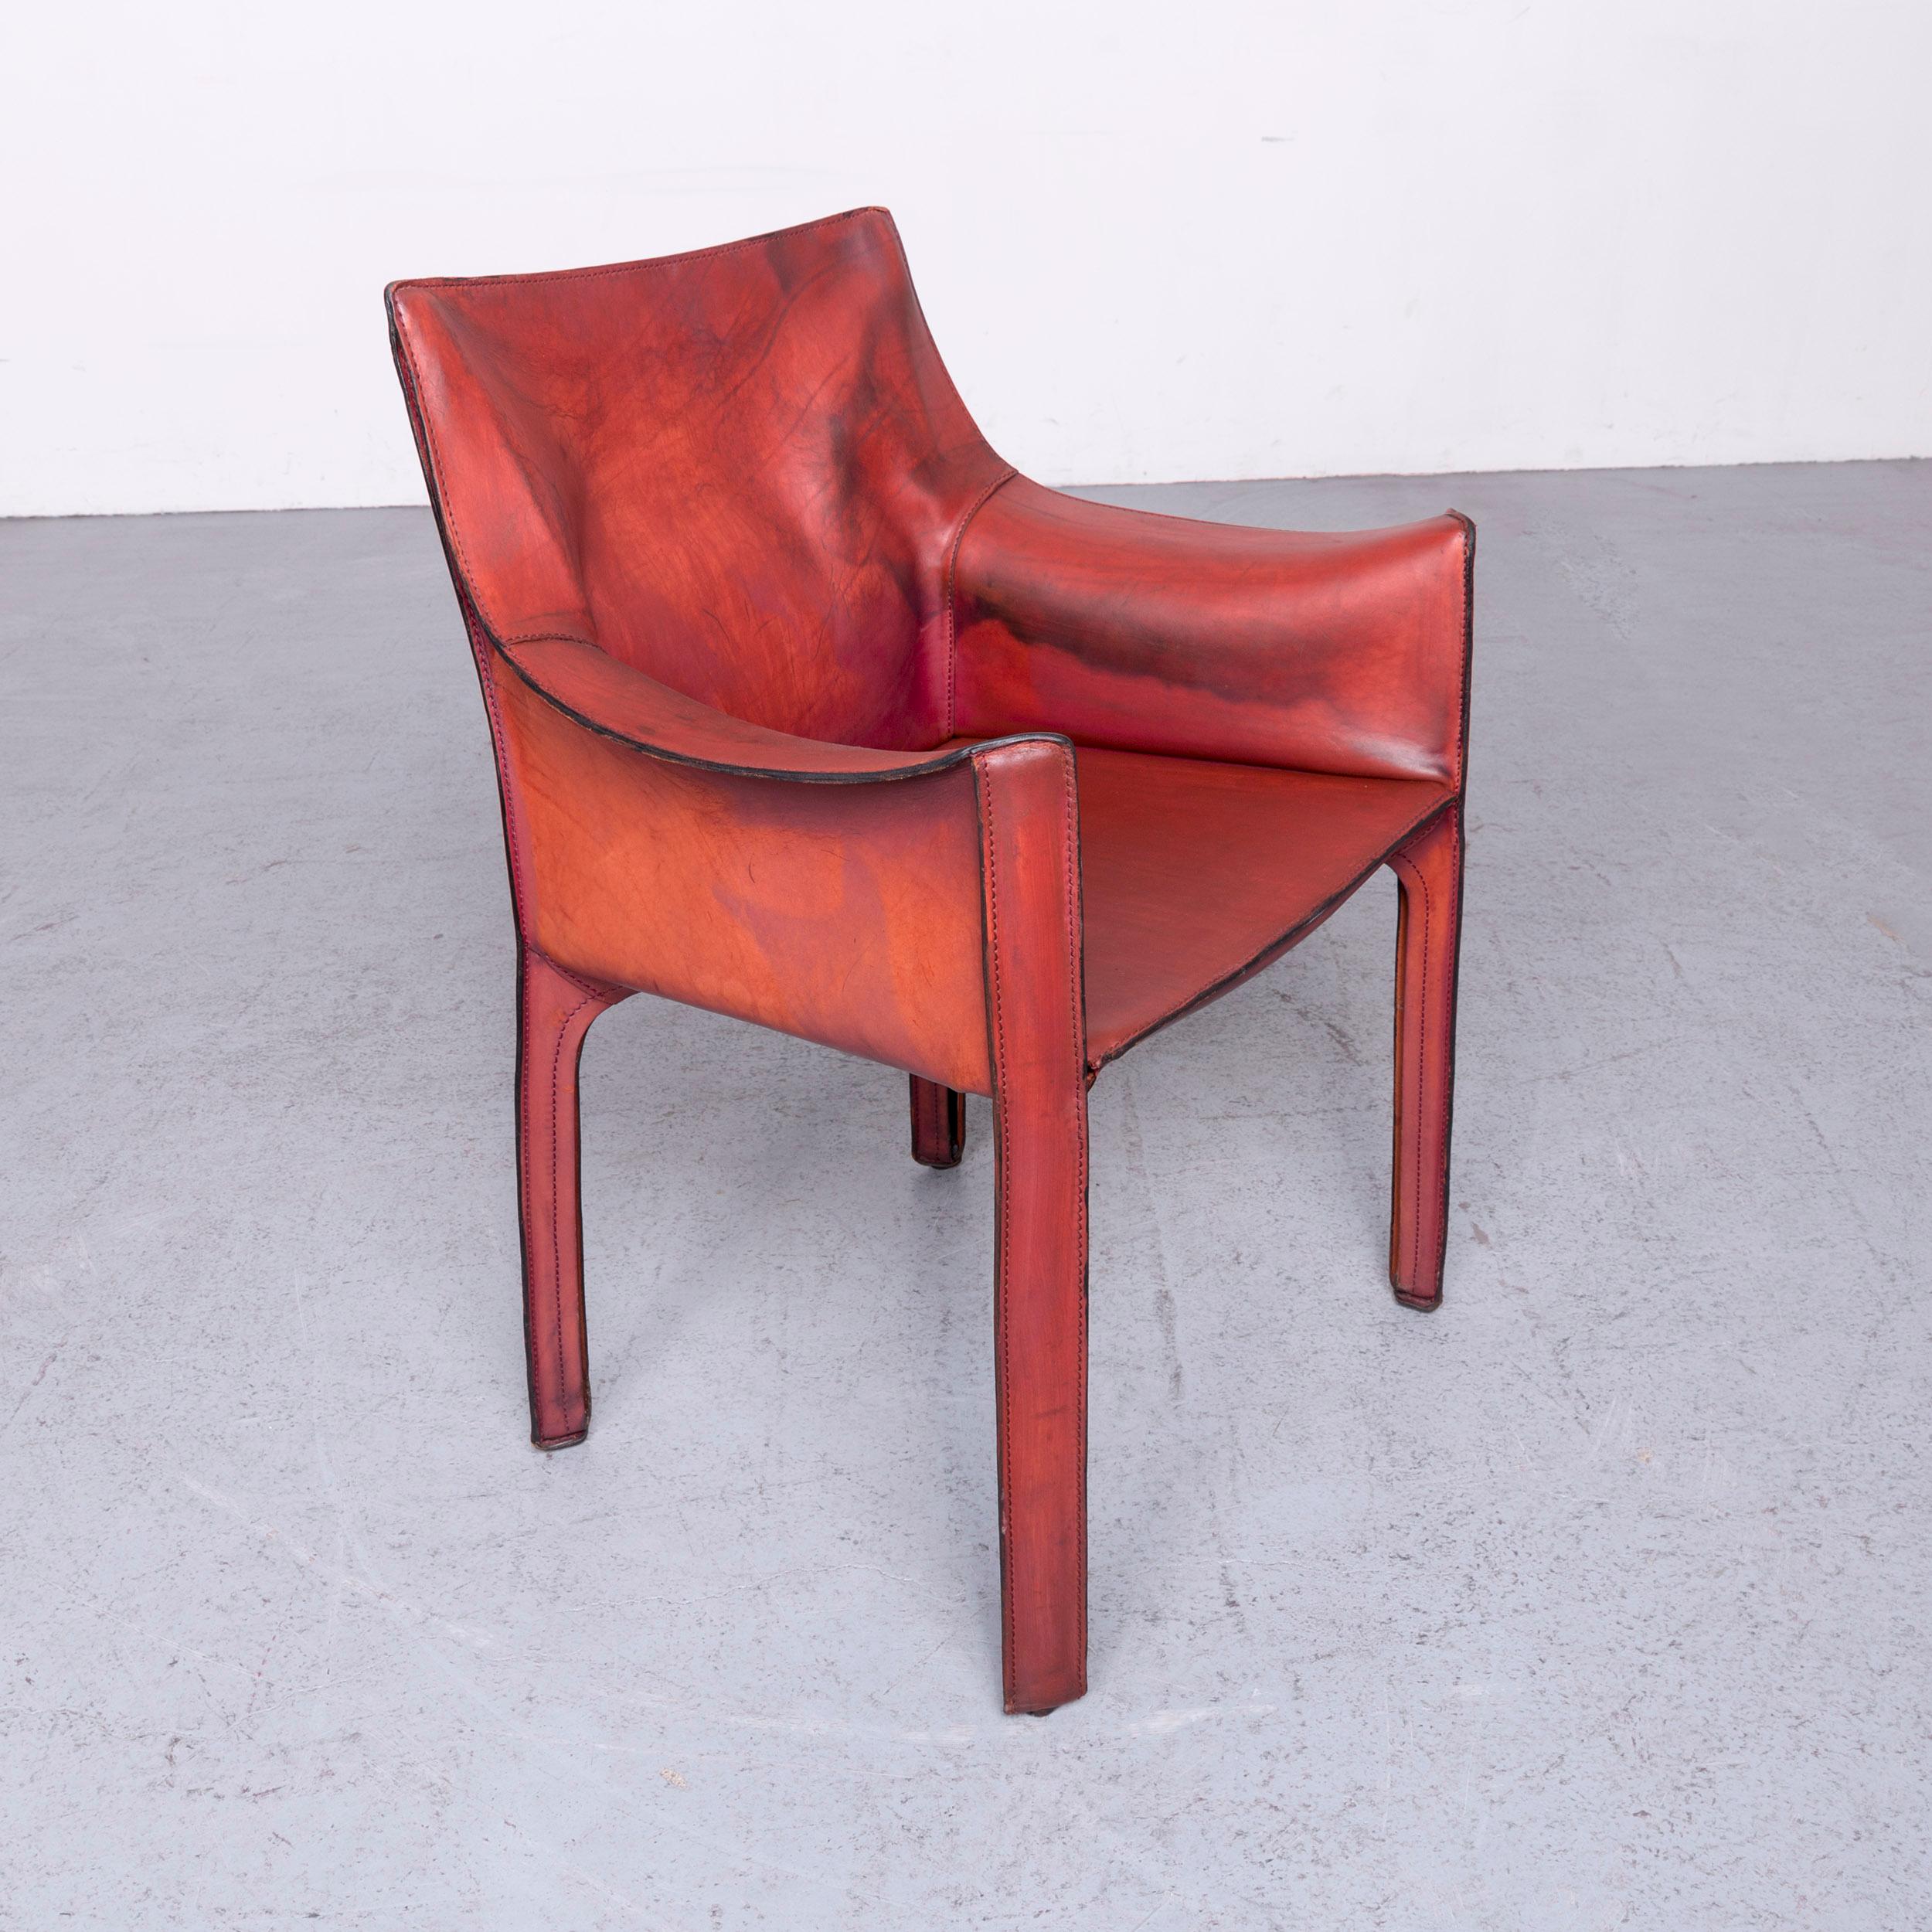 Contemporary Cassina Cab 413 Vintage Leather Armchair Red by Mario Belinni 1970-1979